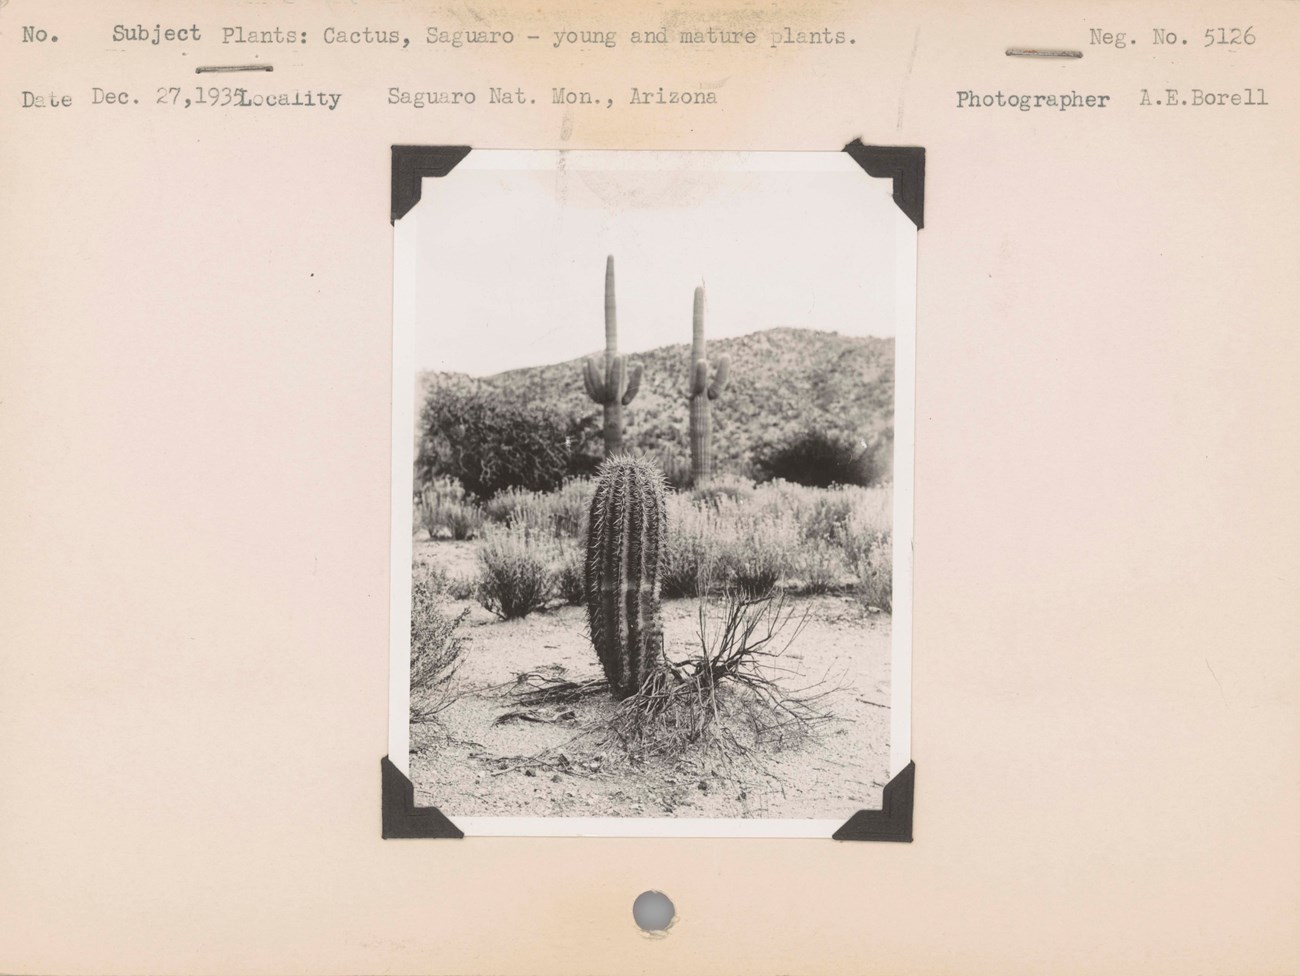 A 1935 photograph of Saguaro cactus mounted on paper, Negative #: 5126